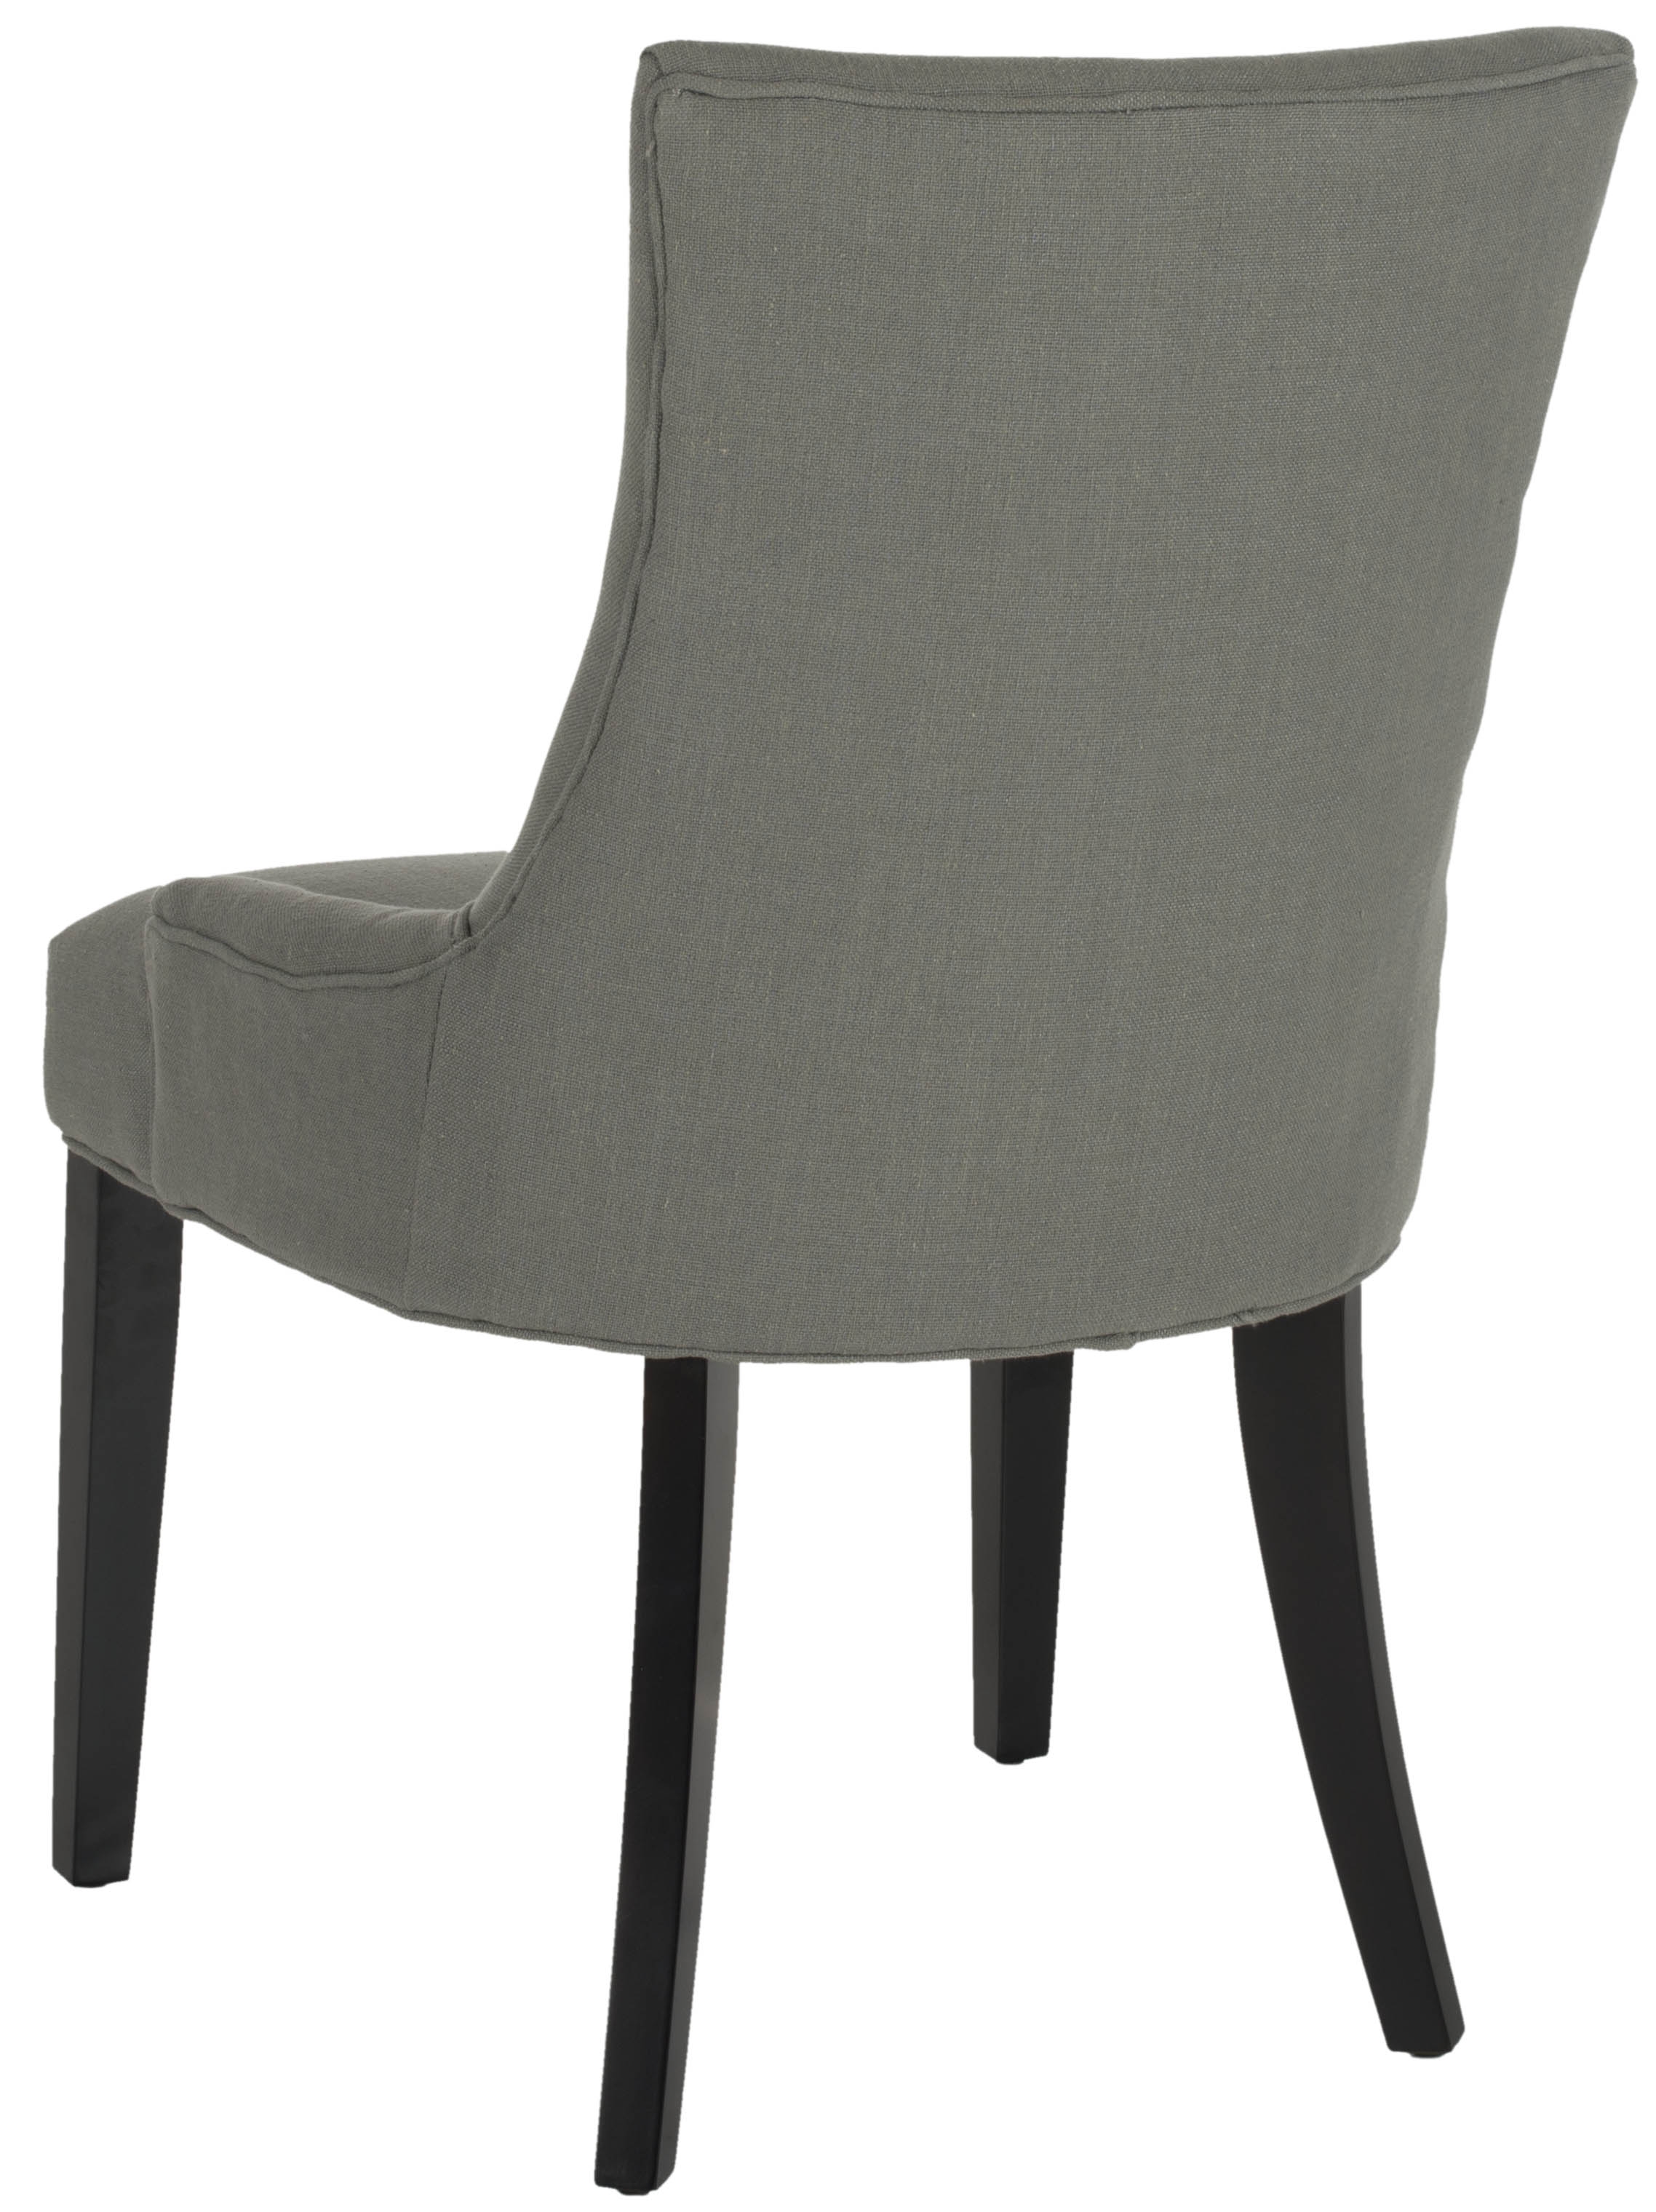 Lester 19''H Dining Chair (Set of 2) - Granite/Espresso - Arlo Home - Image 2